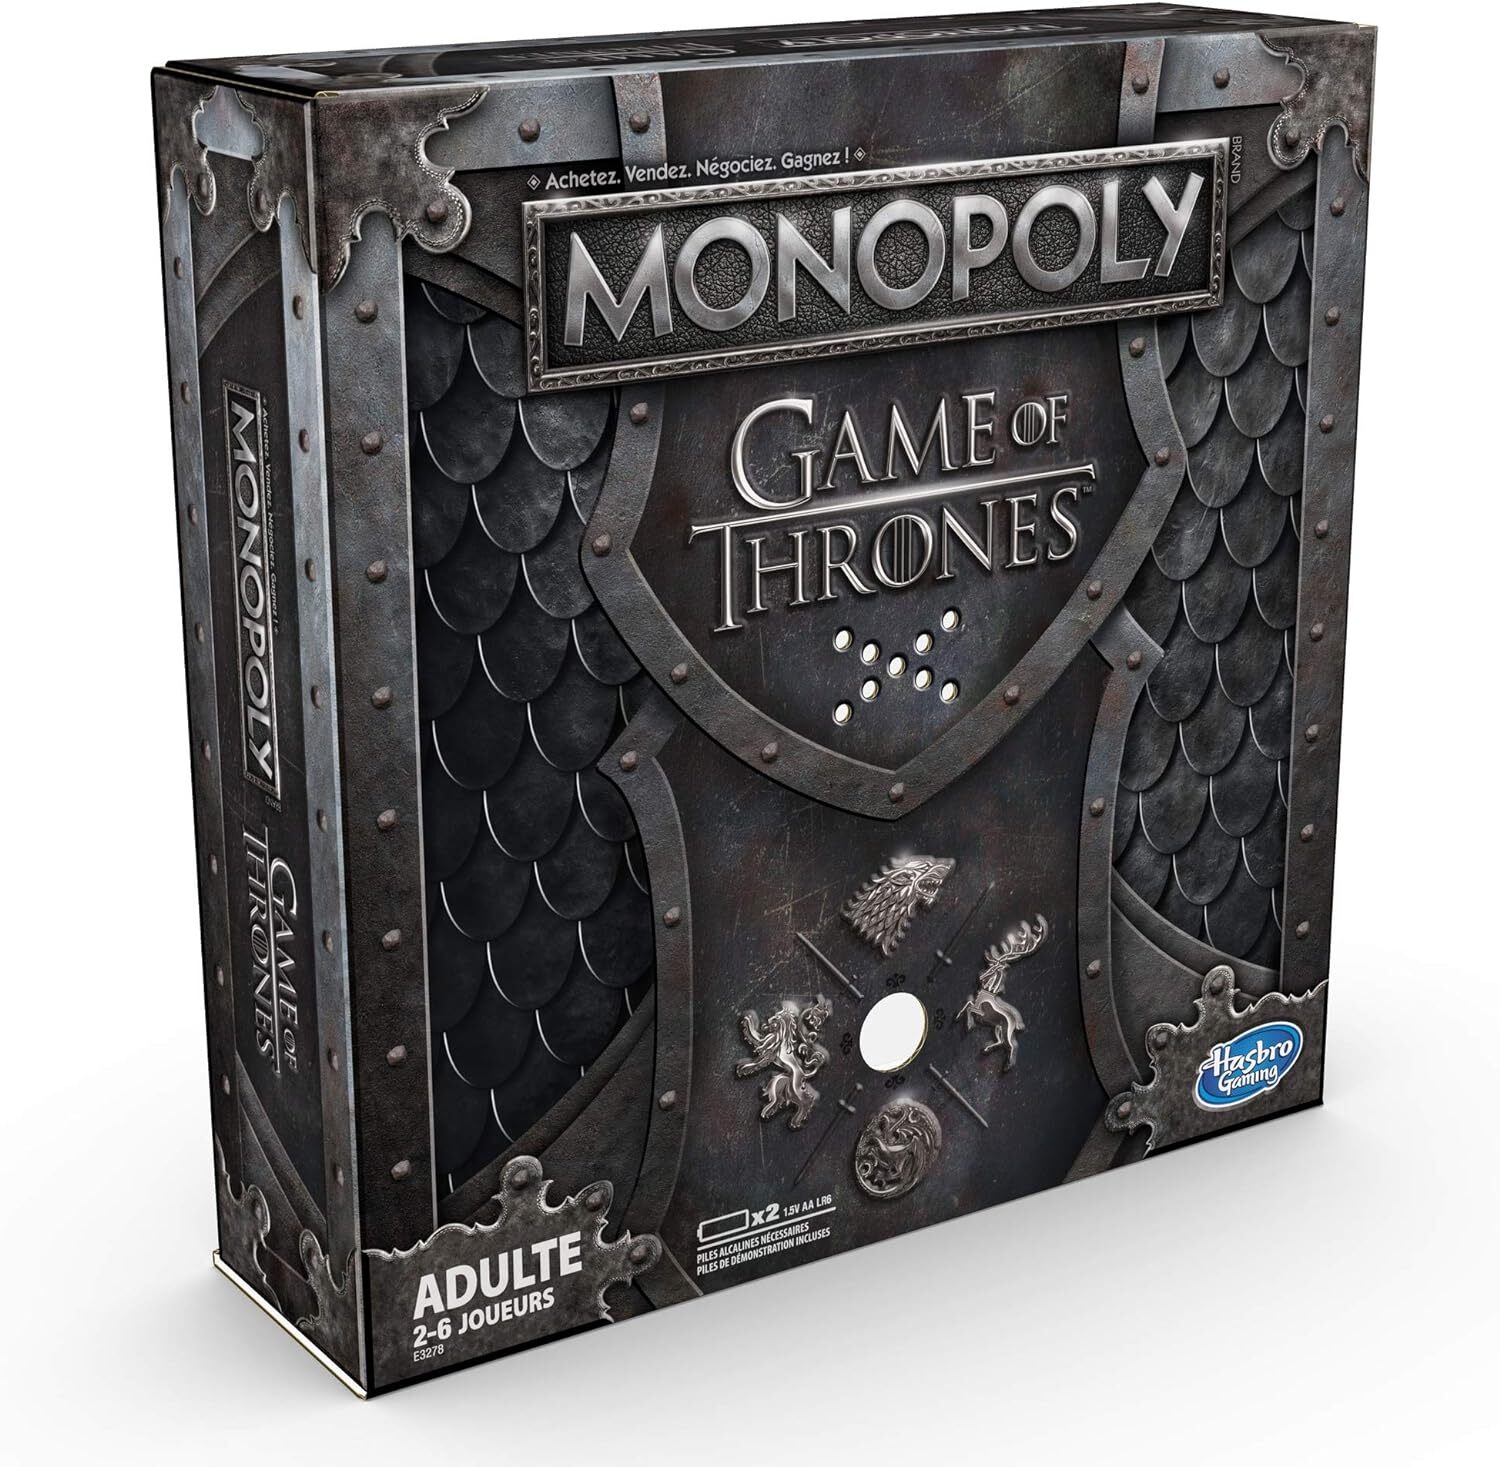 Monopoly Edition Game of Thrones